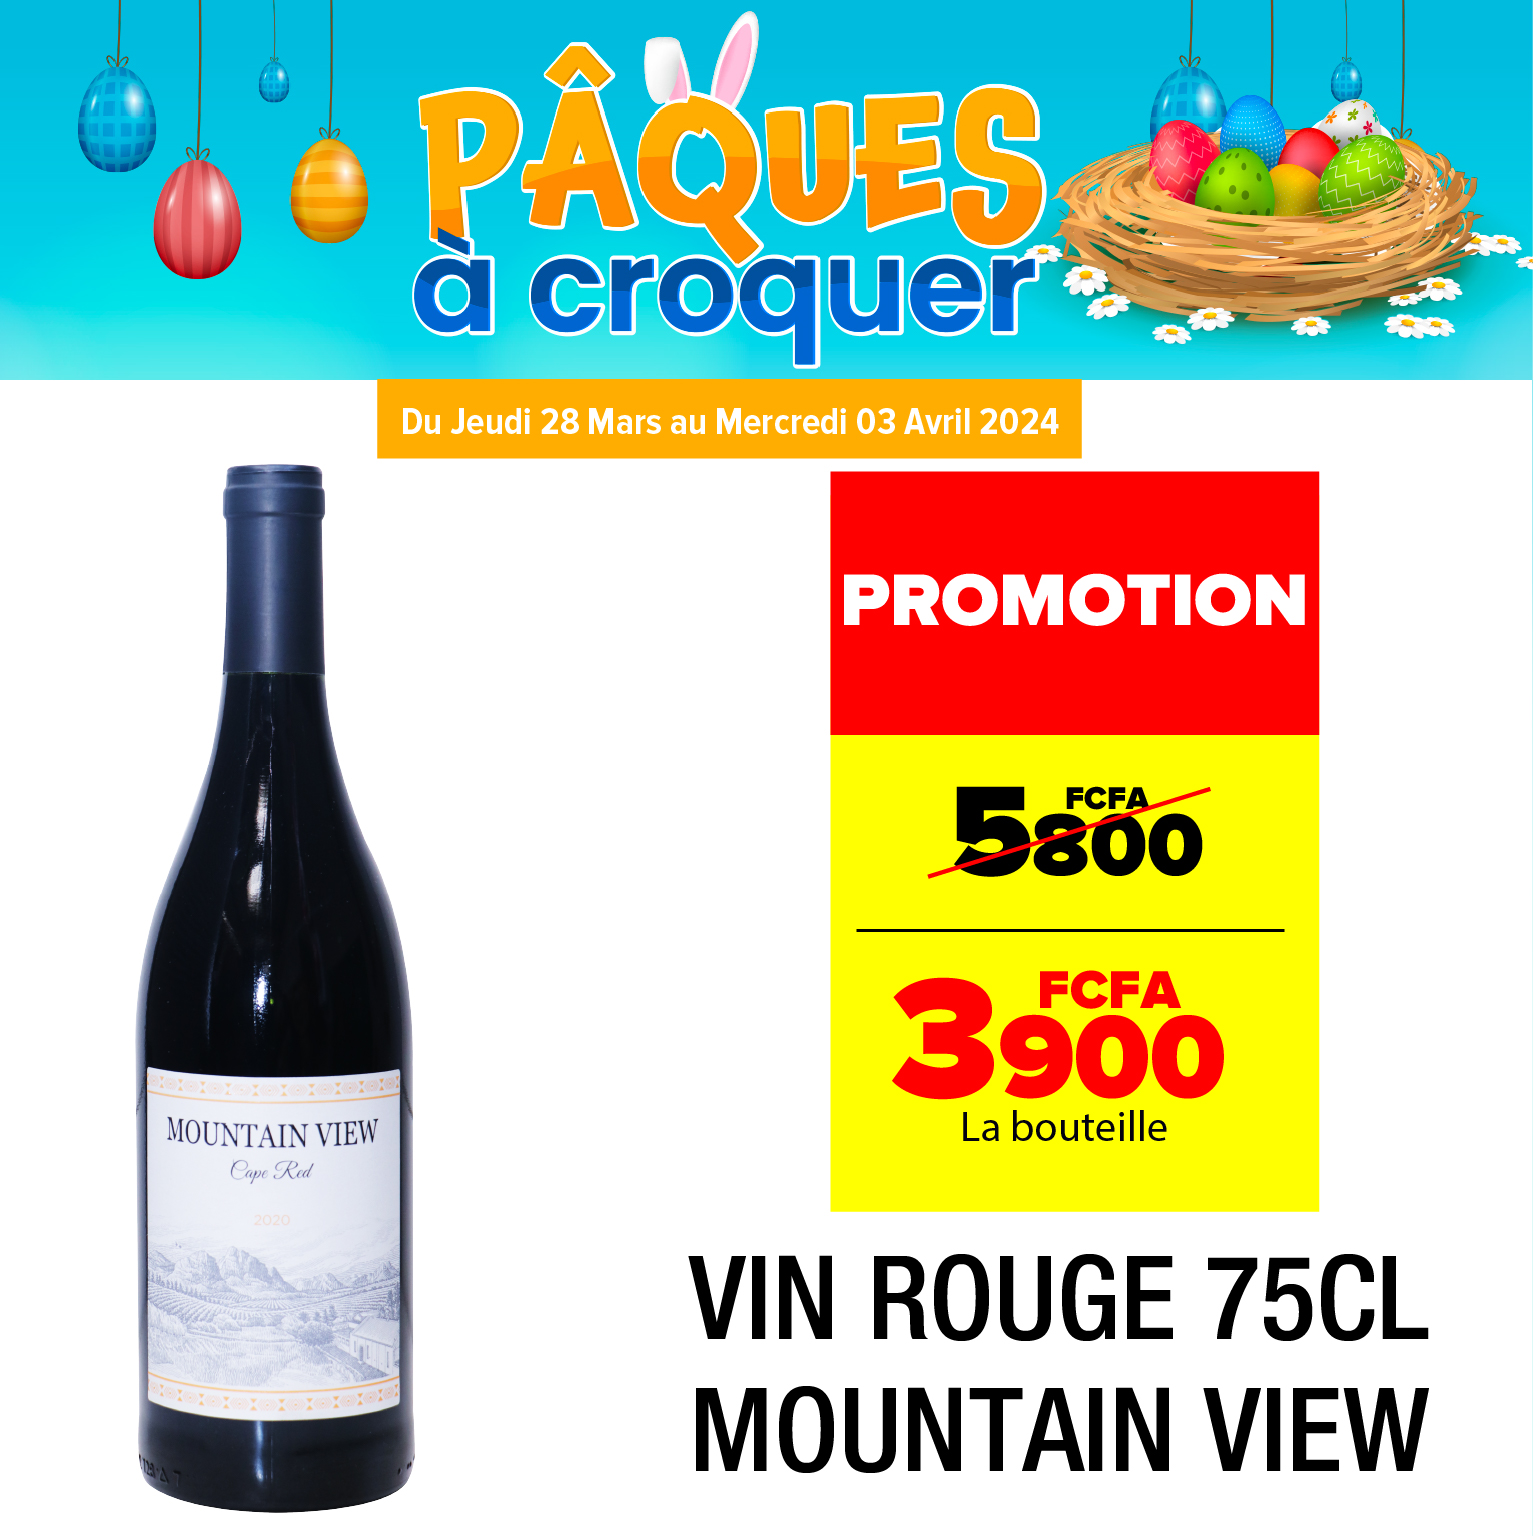 VIN ROUGE 75CL MOUNTAIN VIEW